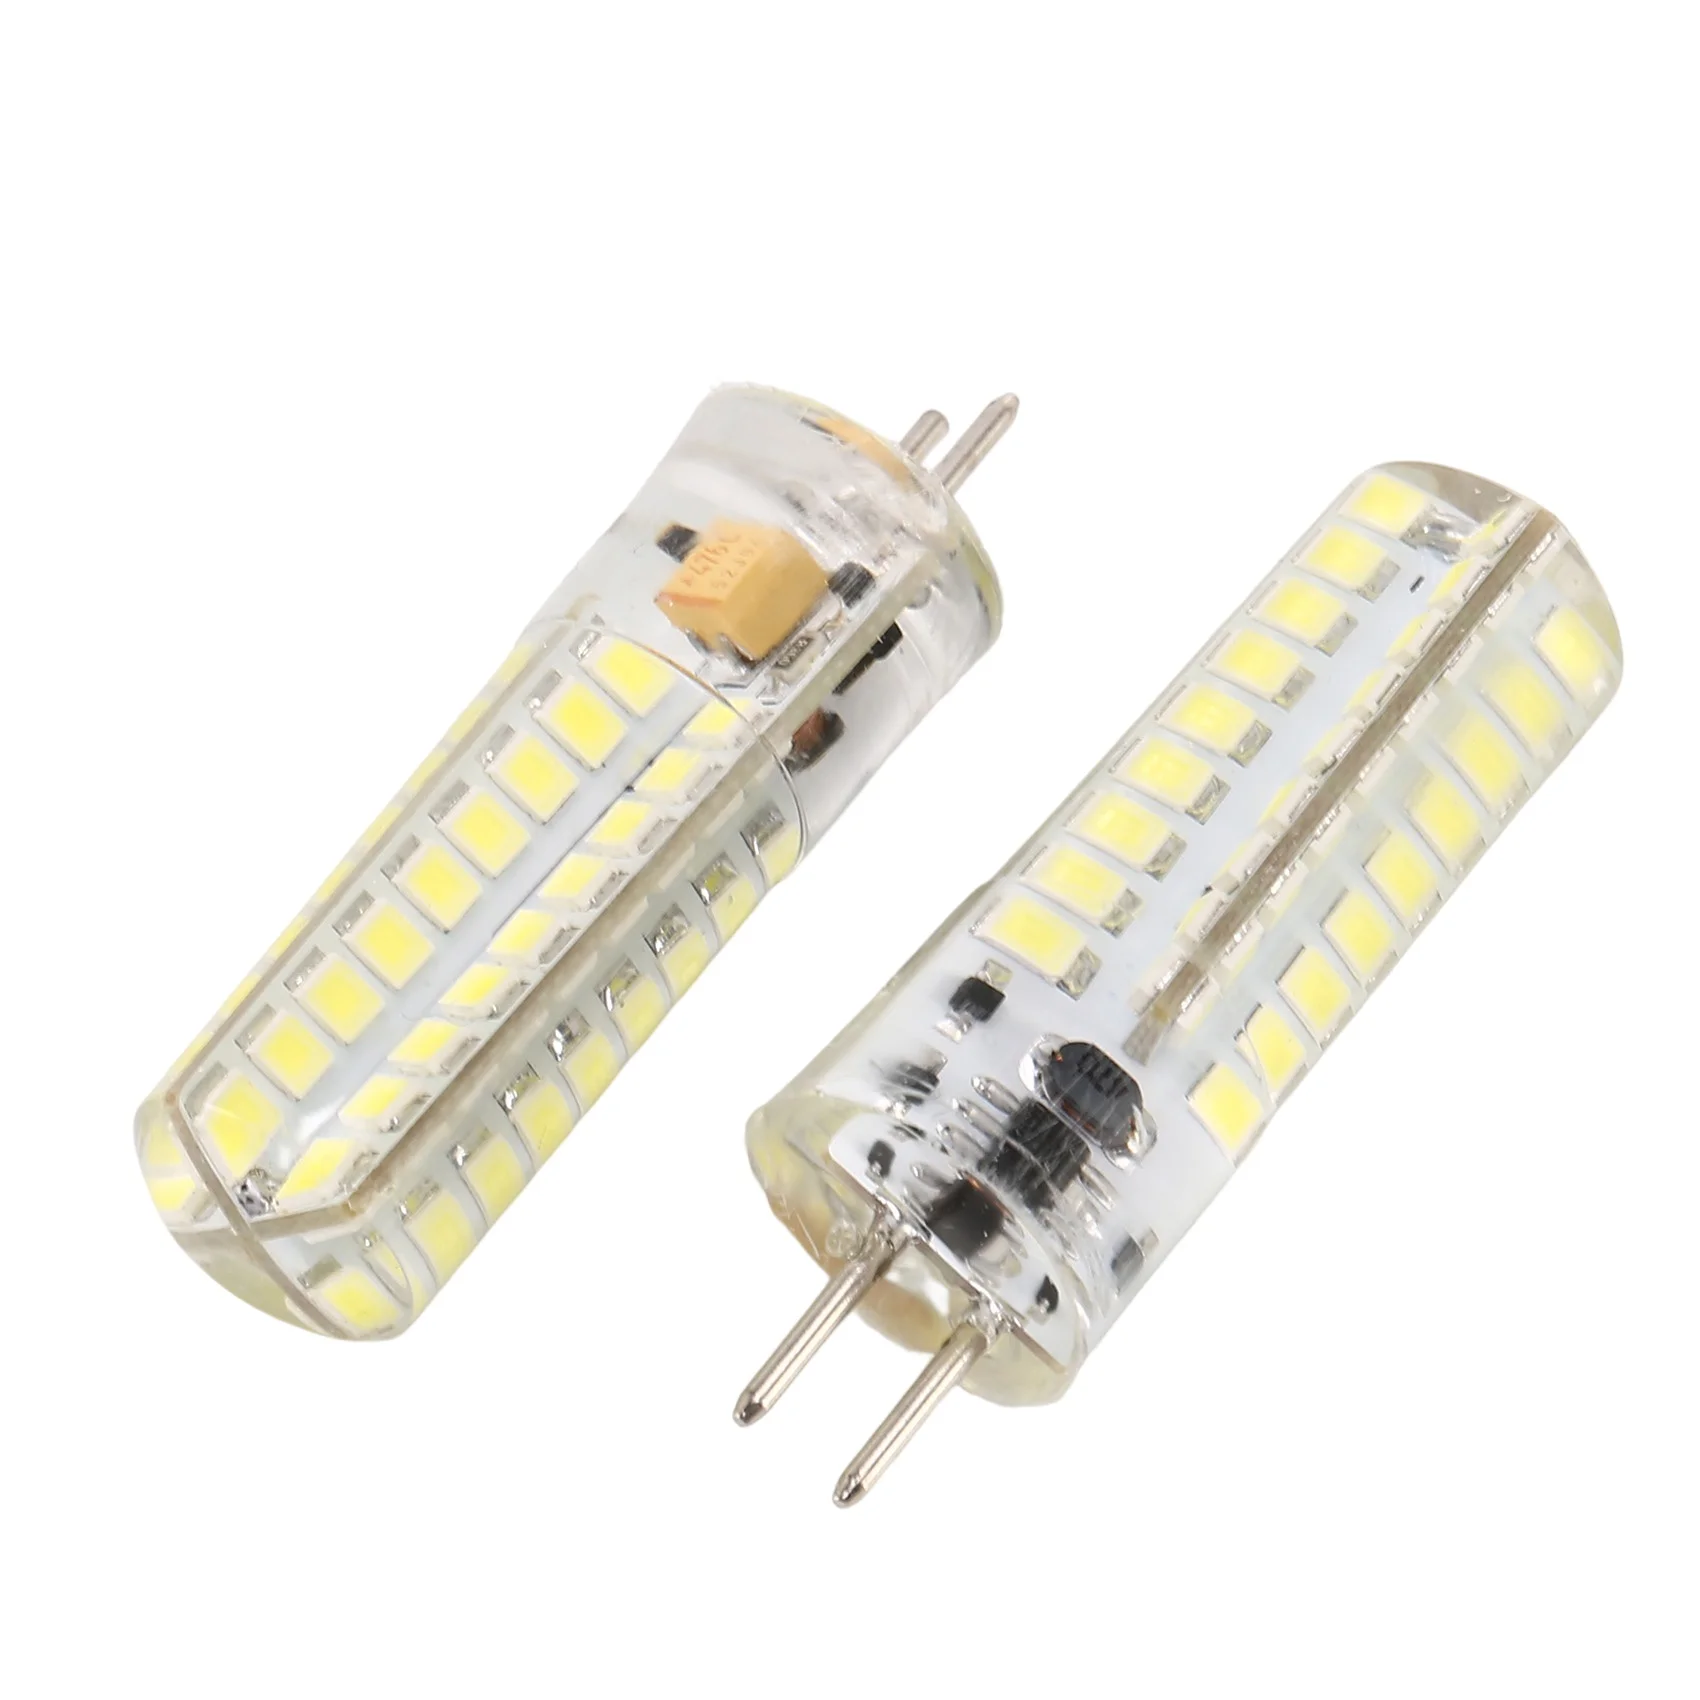 

2x 6.5W GY6.35 LED Bulbs 72 2835 SMD LED 320lm 50W Halogen Lamps Equivalent Dimmable Pure White 6000K 360 Degree Beam Angle